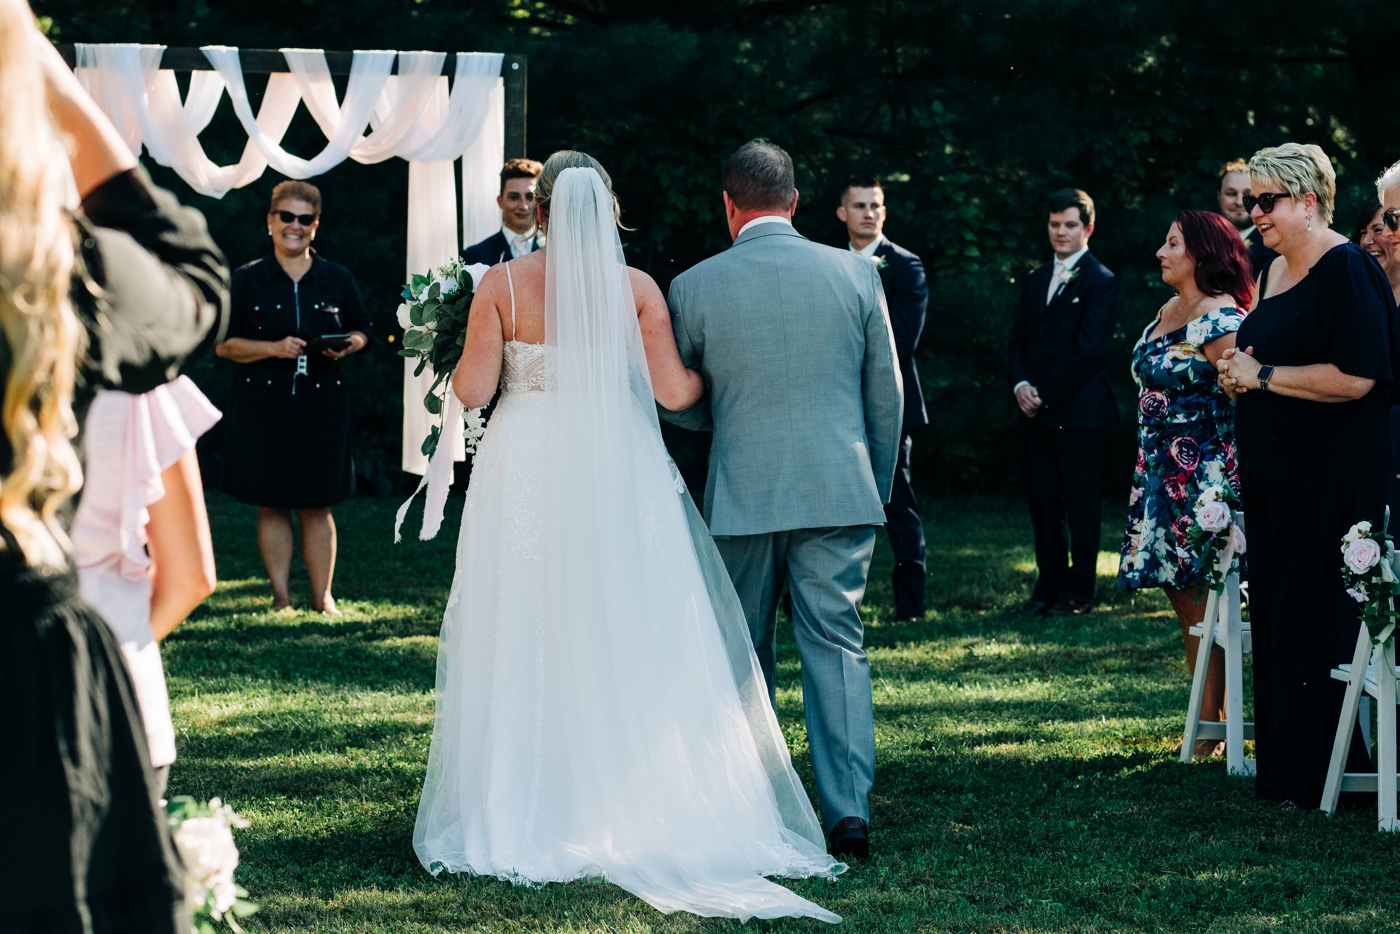 Father of the bride walking down the aisle at backyard wedding ceremony in Greenwood